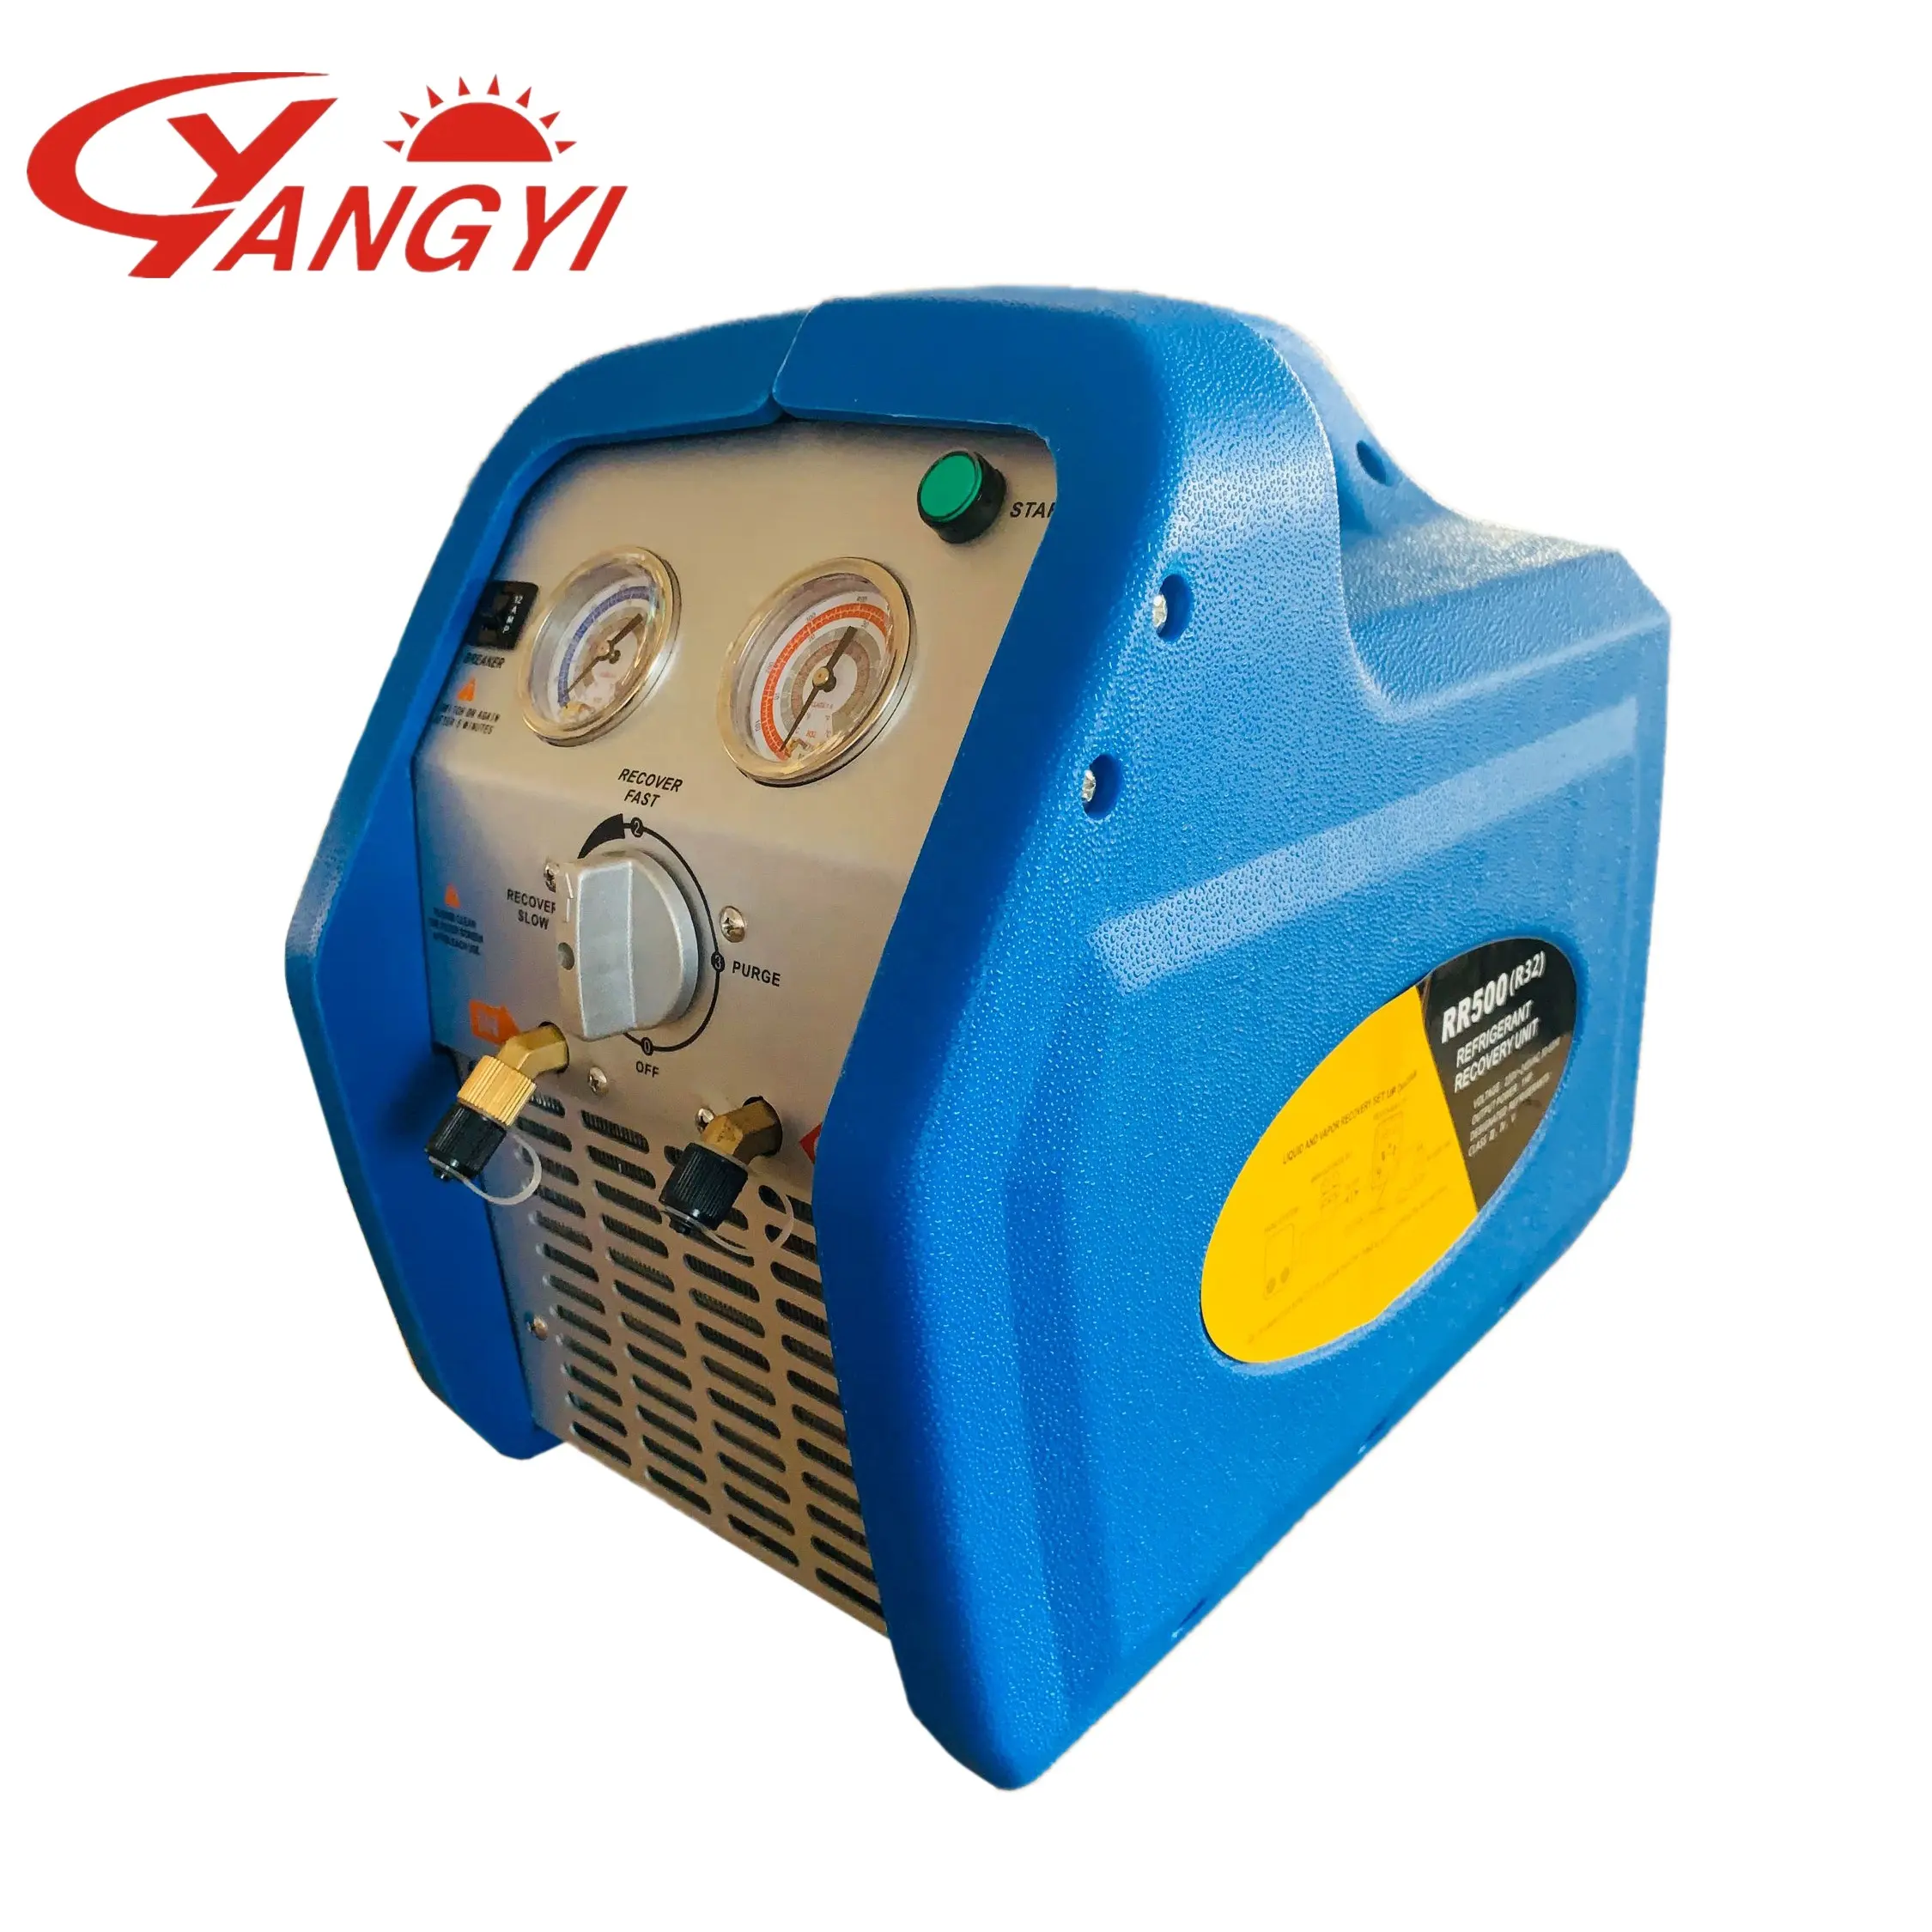 Portable Auto Refrigerant Recovery Machine/Unit for other refrigeration R134a R32for air conditioning Car AC Recharge Machine